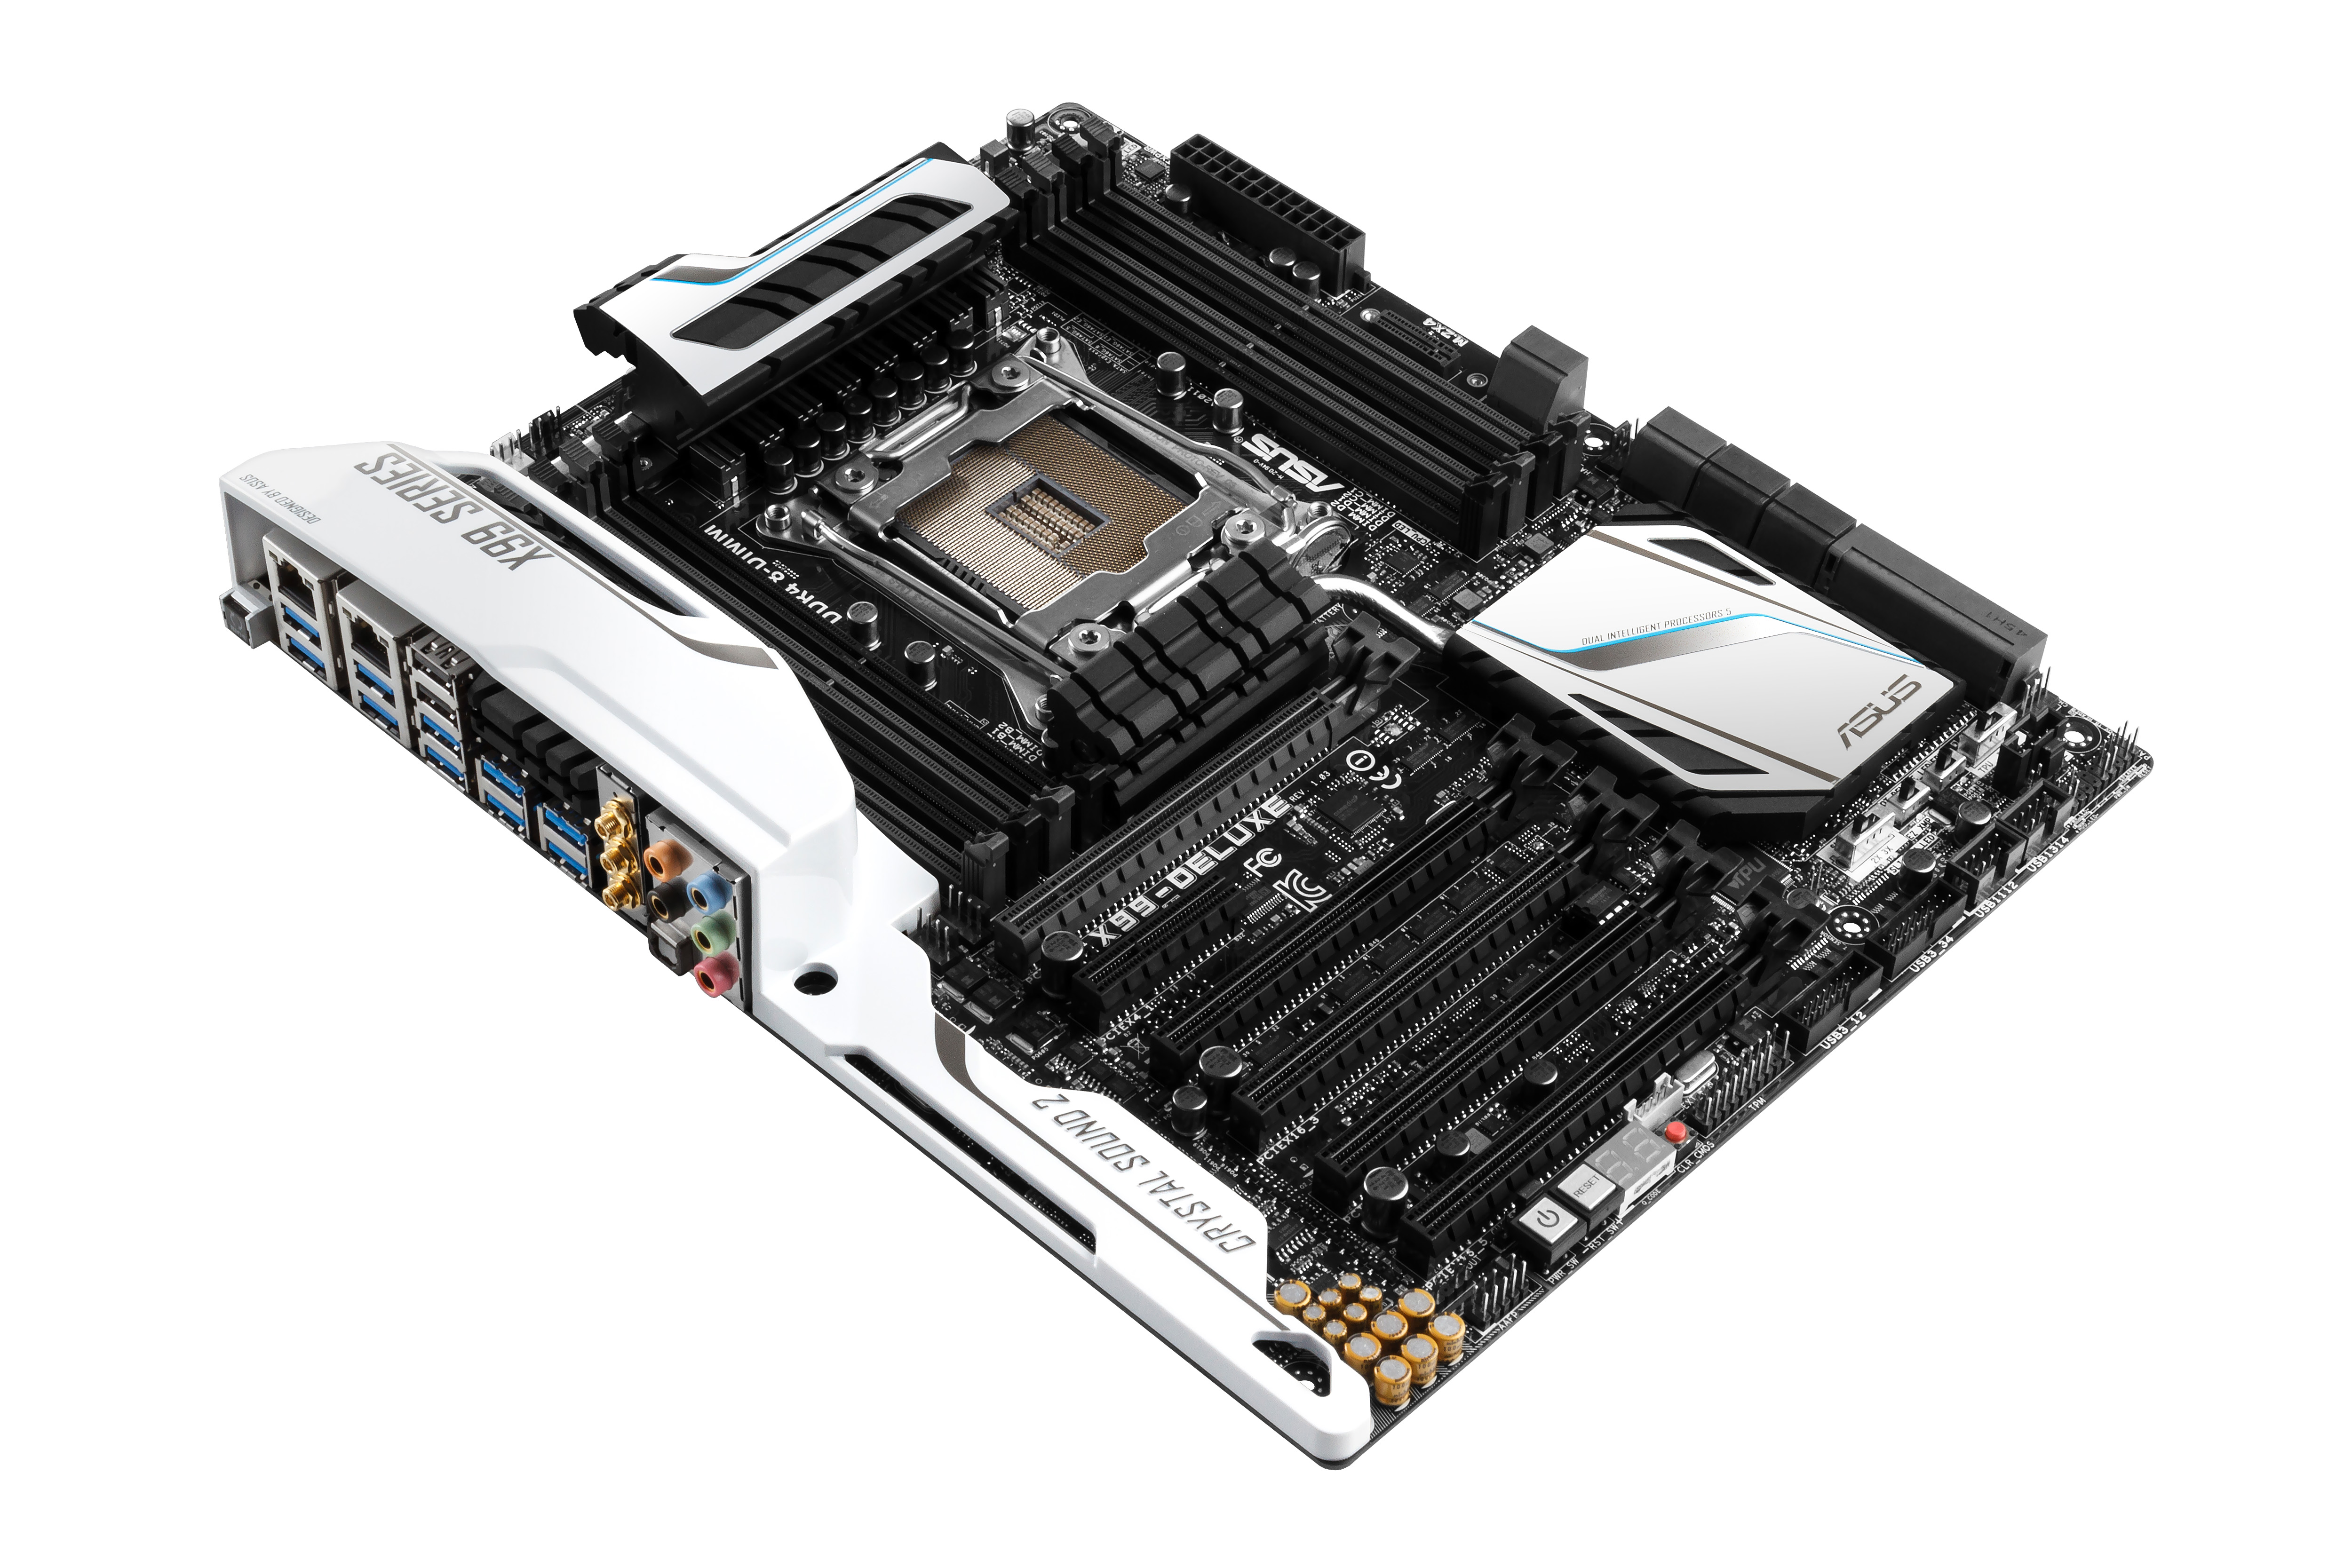 ASUS X99-Deluxe Overview, Board Features - The Intel Haswell-E X99